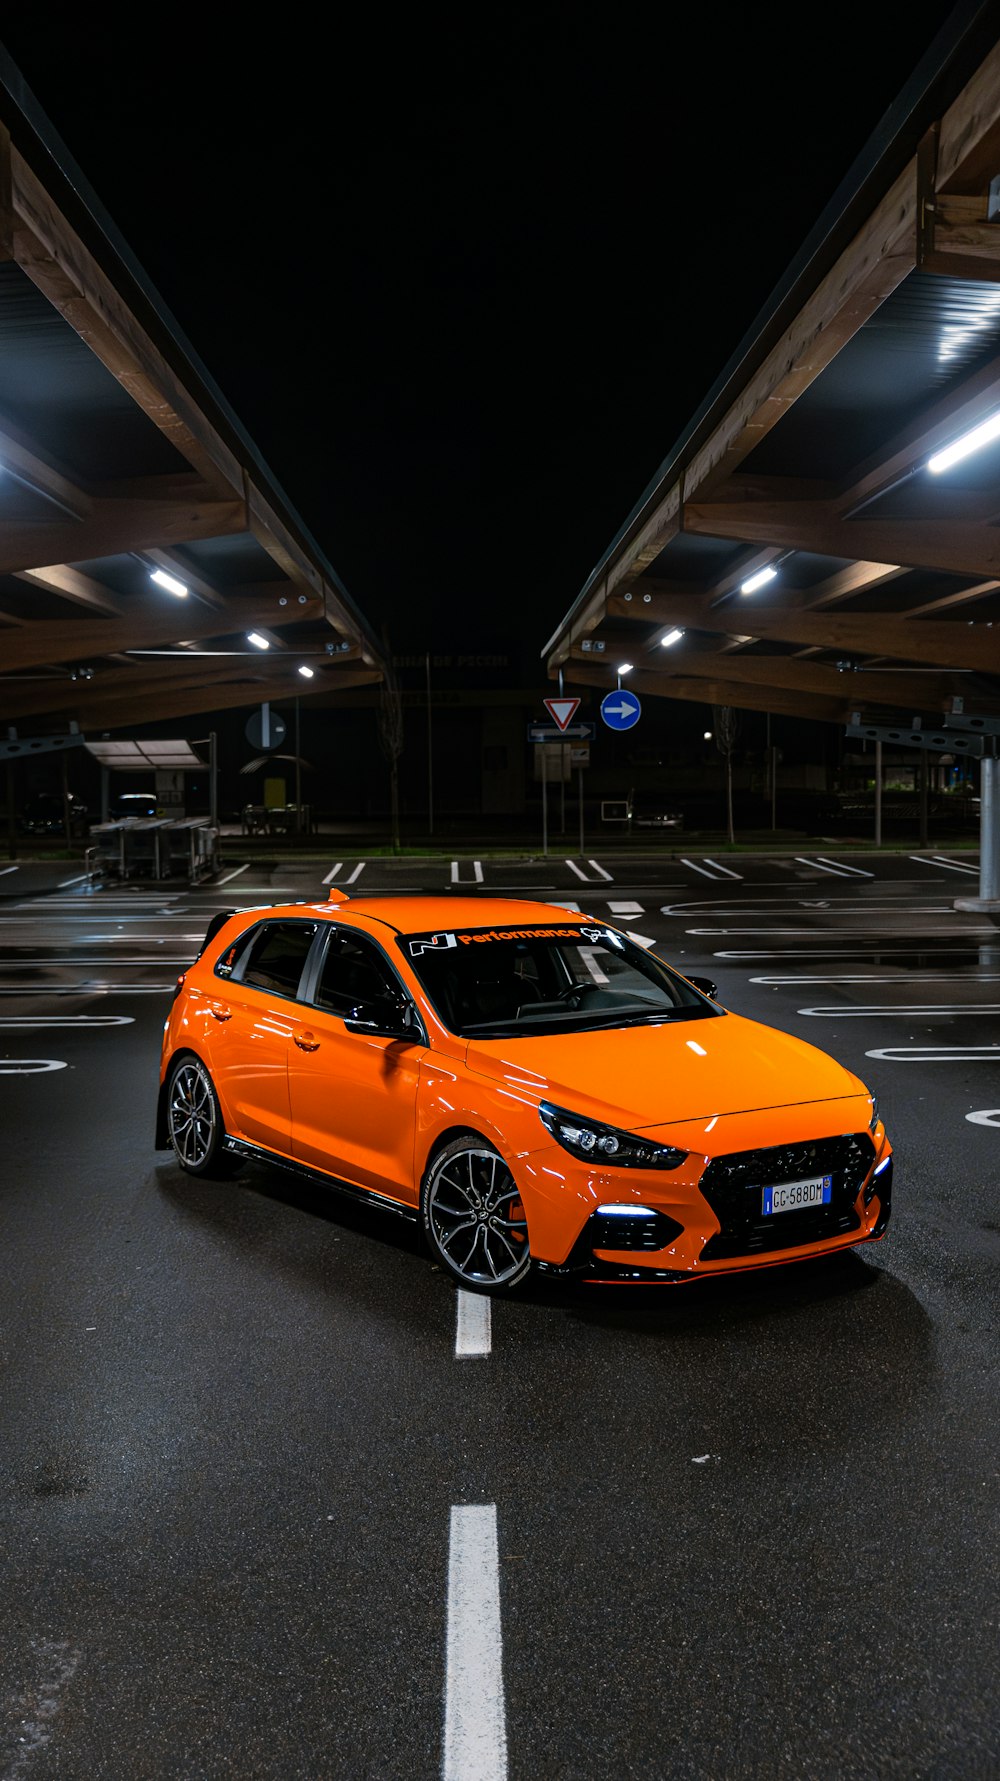 an orange car parked in a parking lot at night